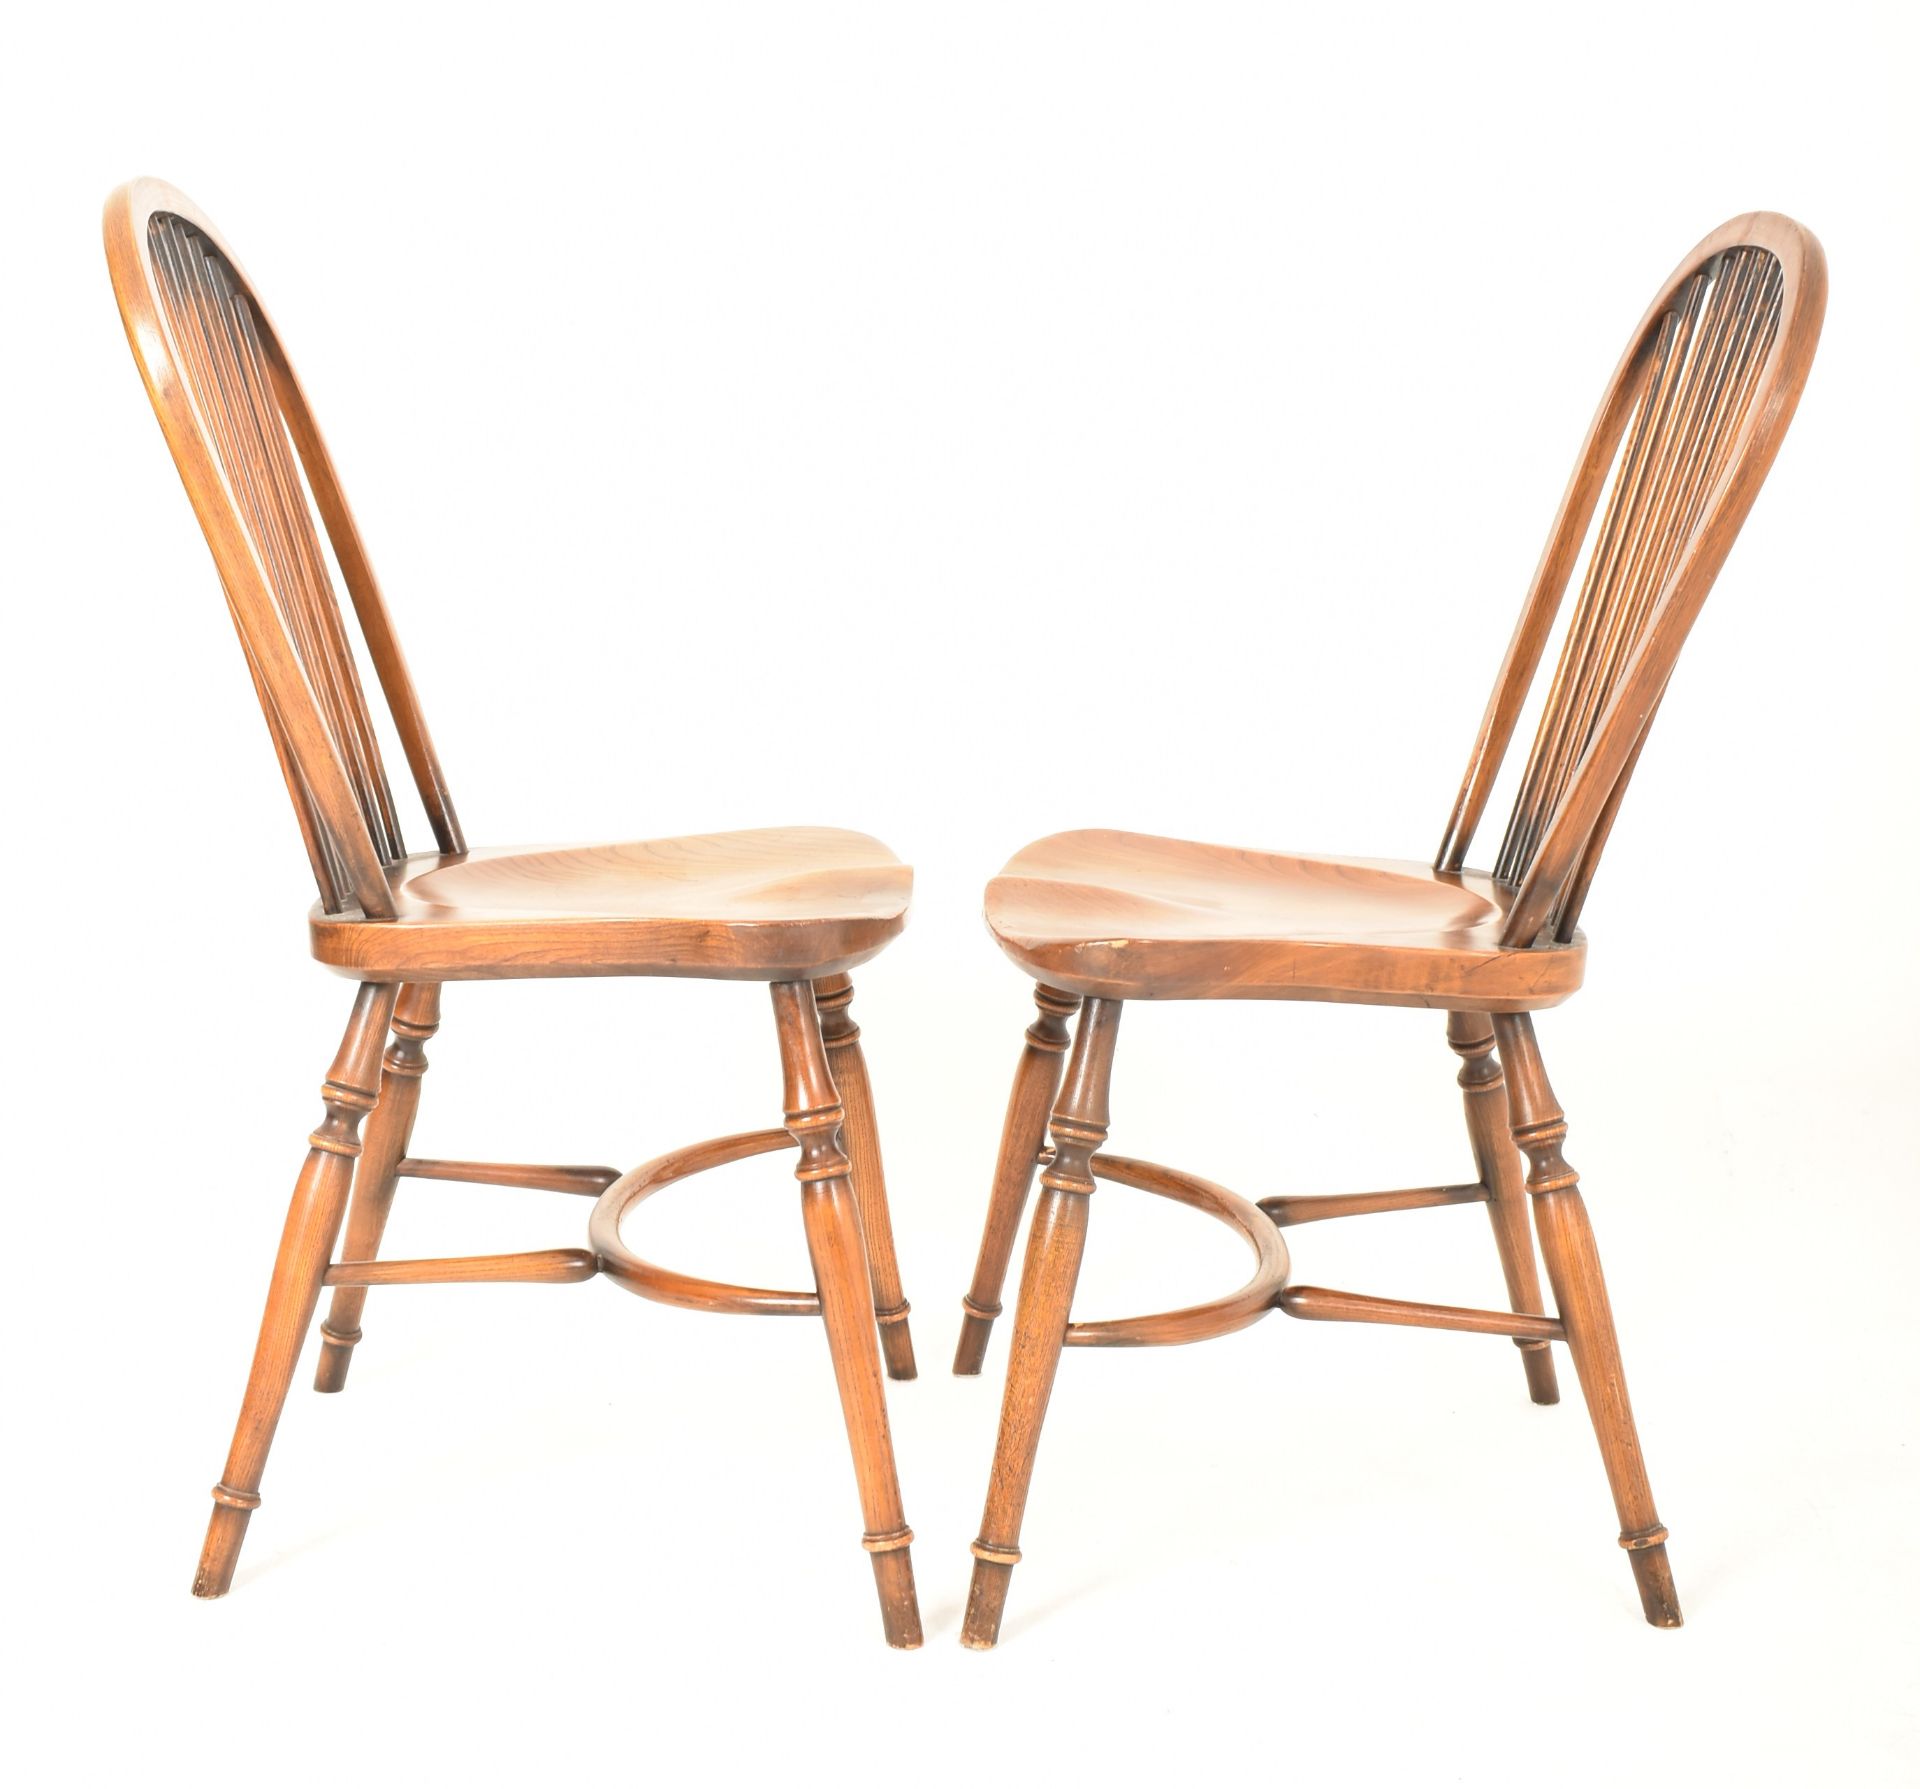 STEWART LINFORD FURNITURE - SIX WINDSOR STYLE STICK BACK CHAIRS - Image 4 of 8